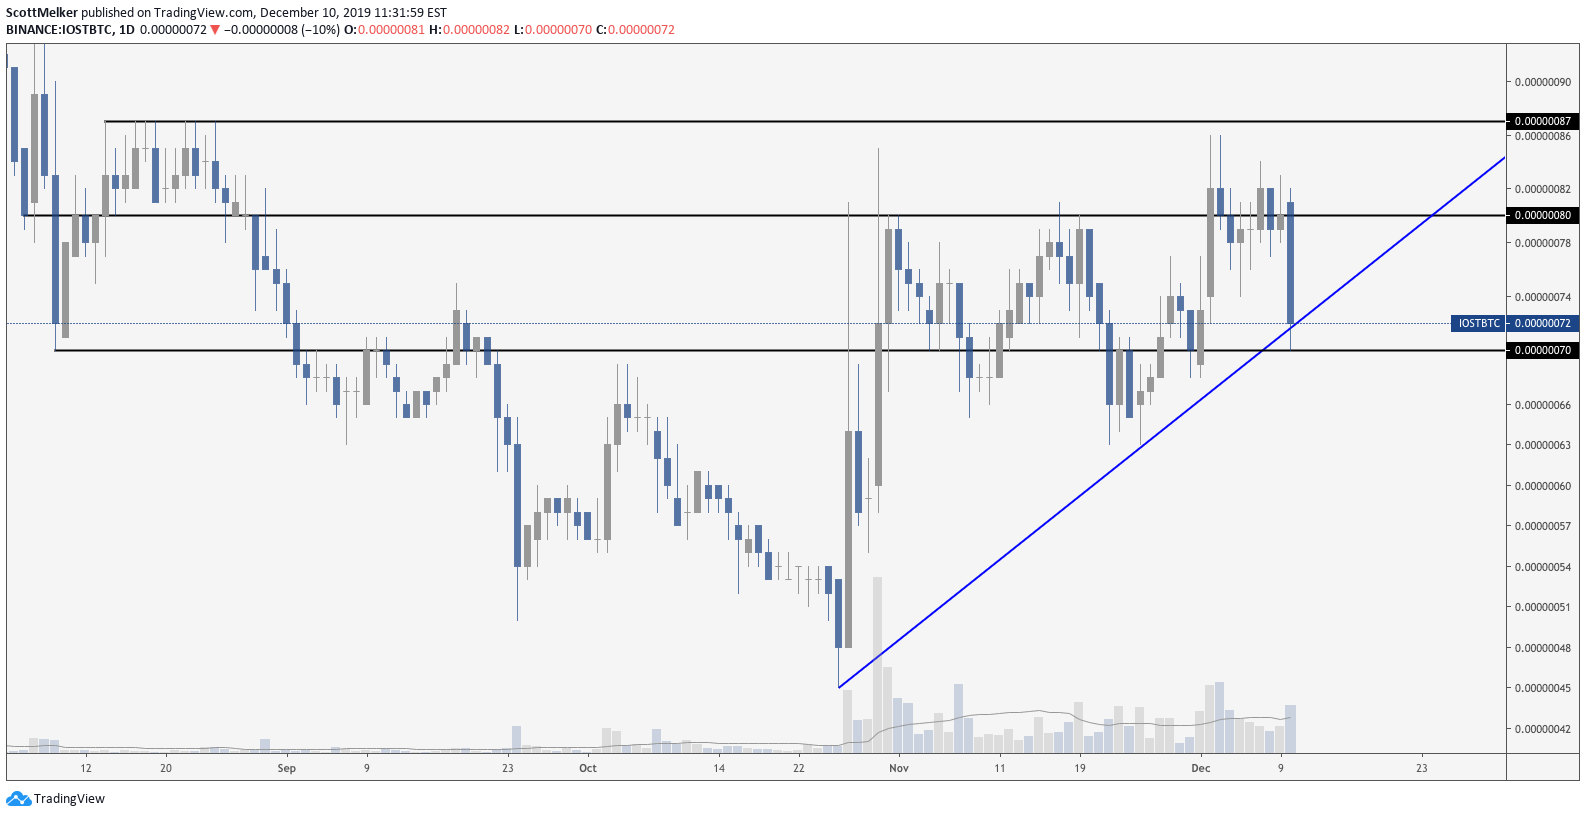 IOST BTC daily chart. Source: TradingView